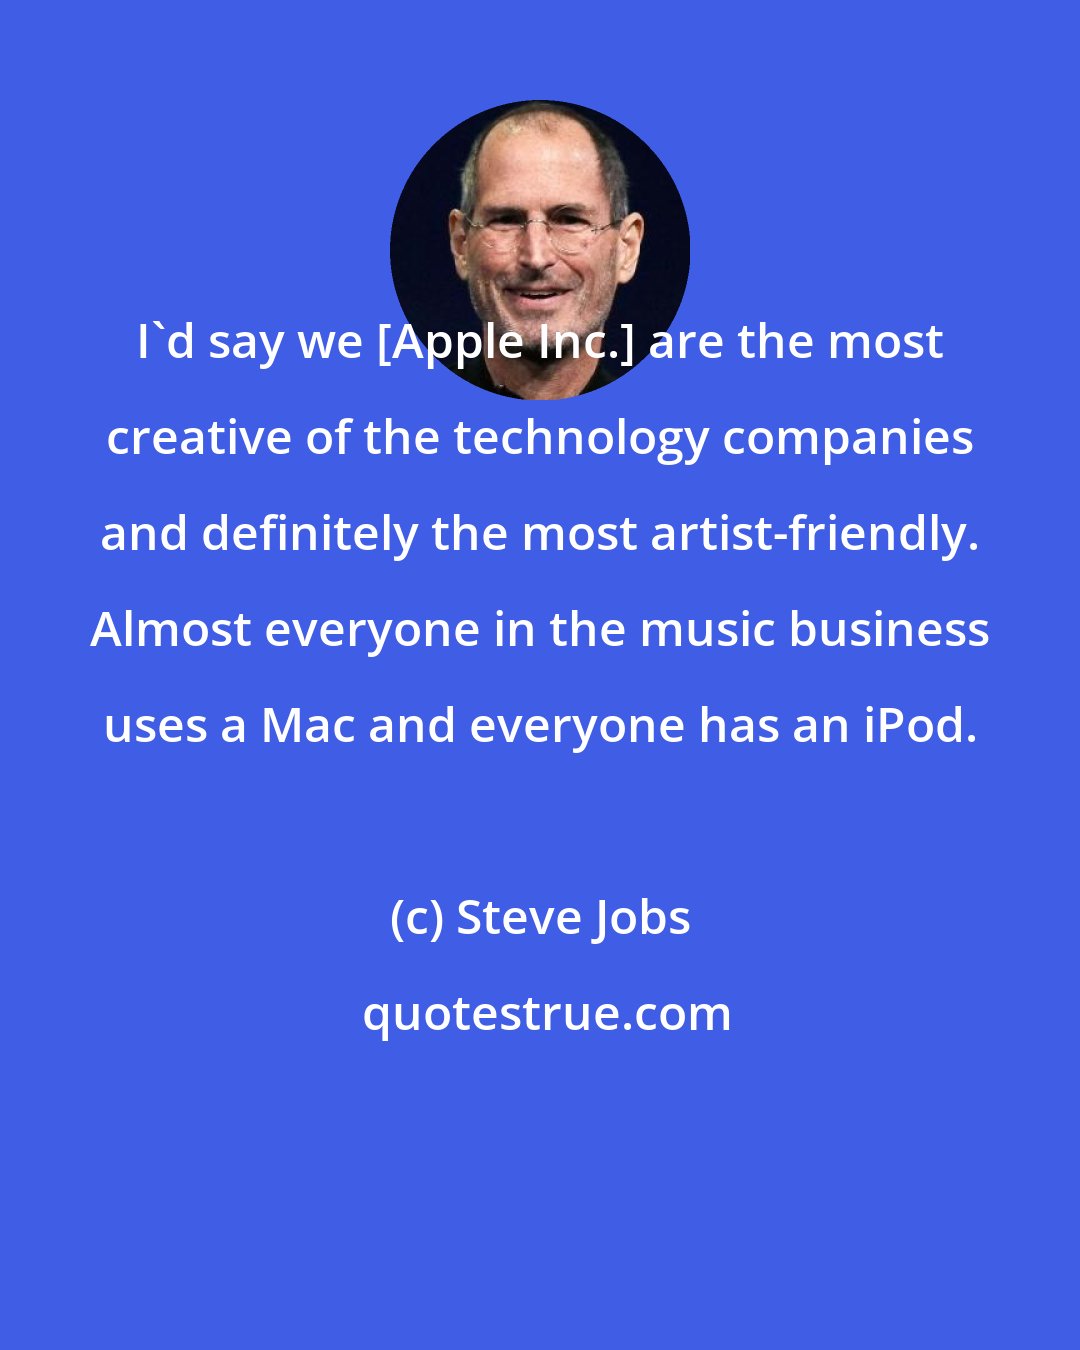 Steve Jobs: I'd say we [Apple Inc.] are the most creative of the technology companies and definitely the most artist-friendly. Almost everyone in the music business uses a Mac and everyone has an iPod.